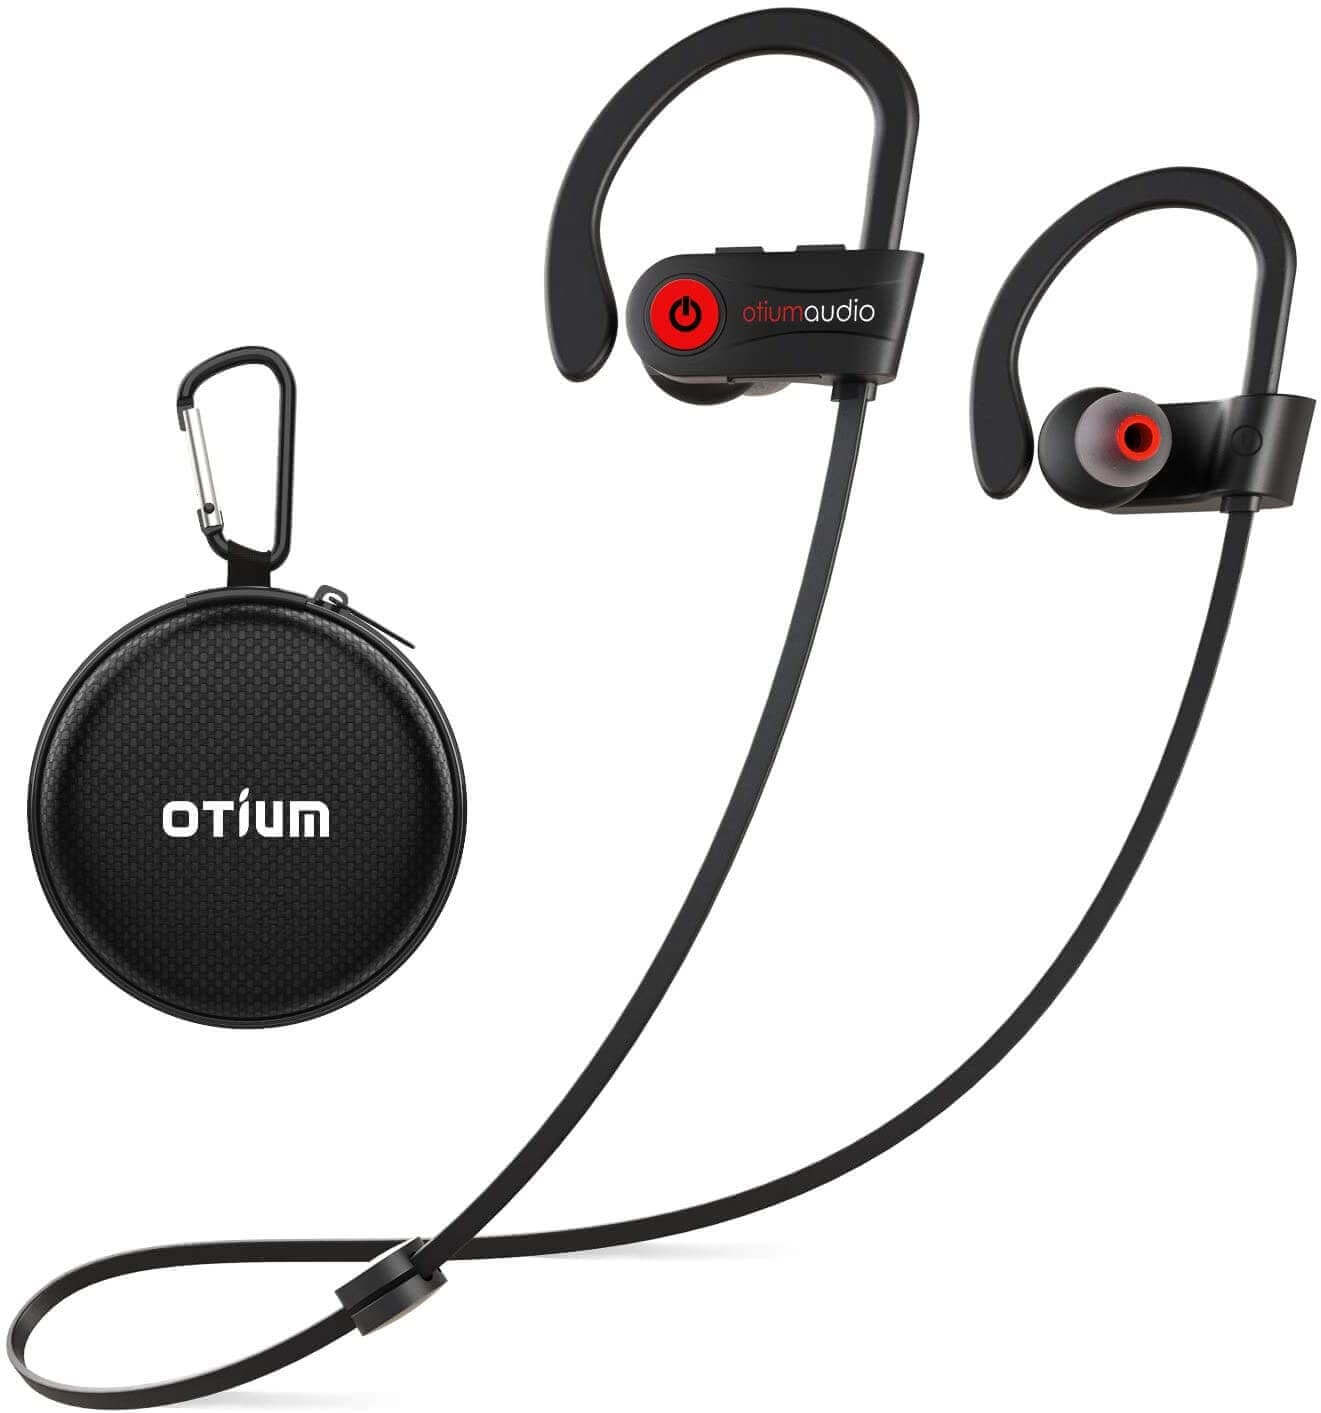 Black wireless earbuds with a black pouch.